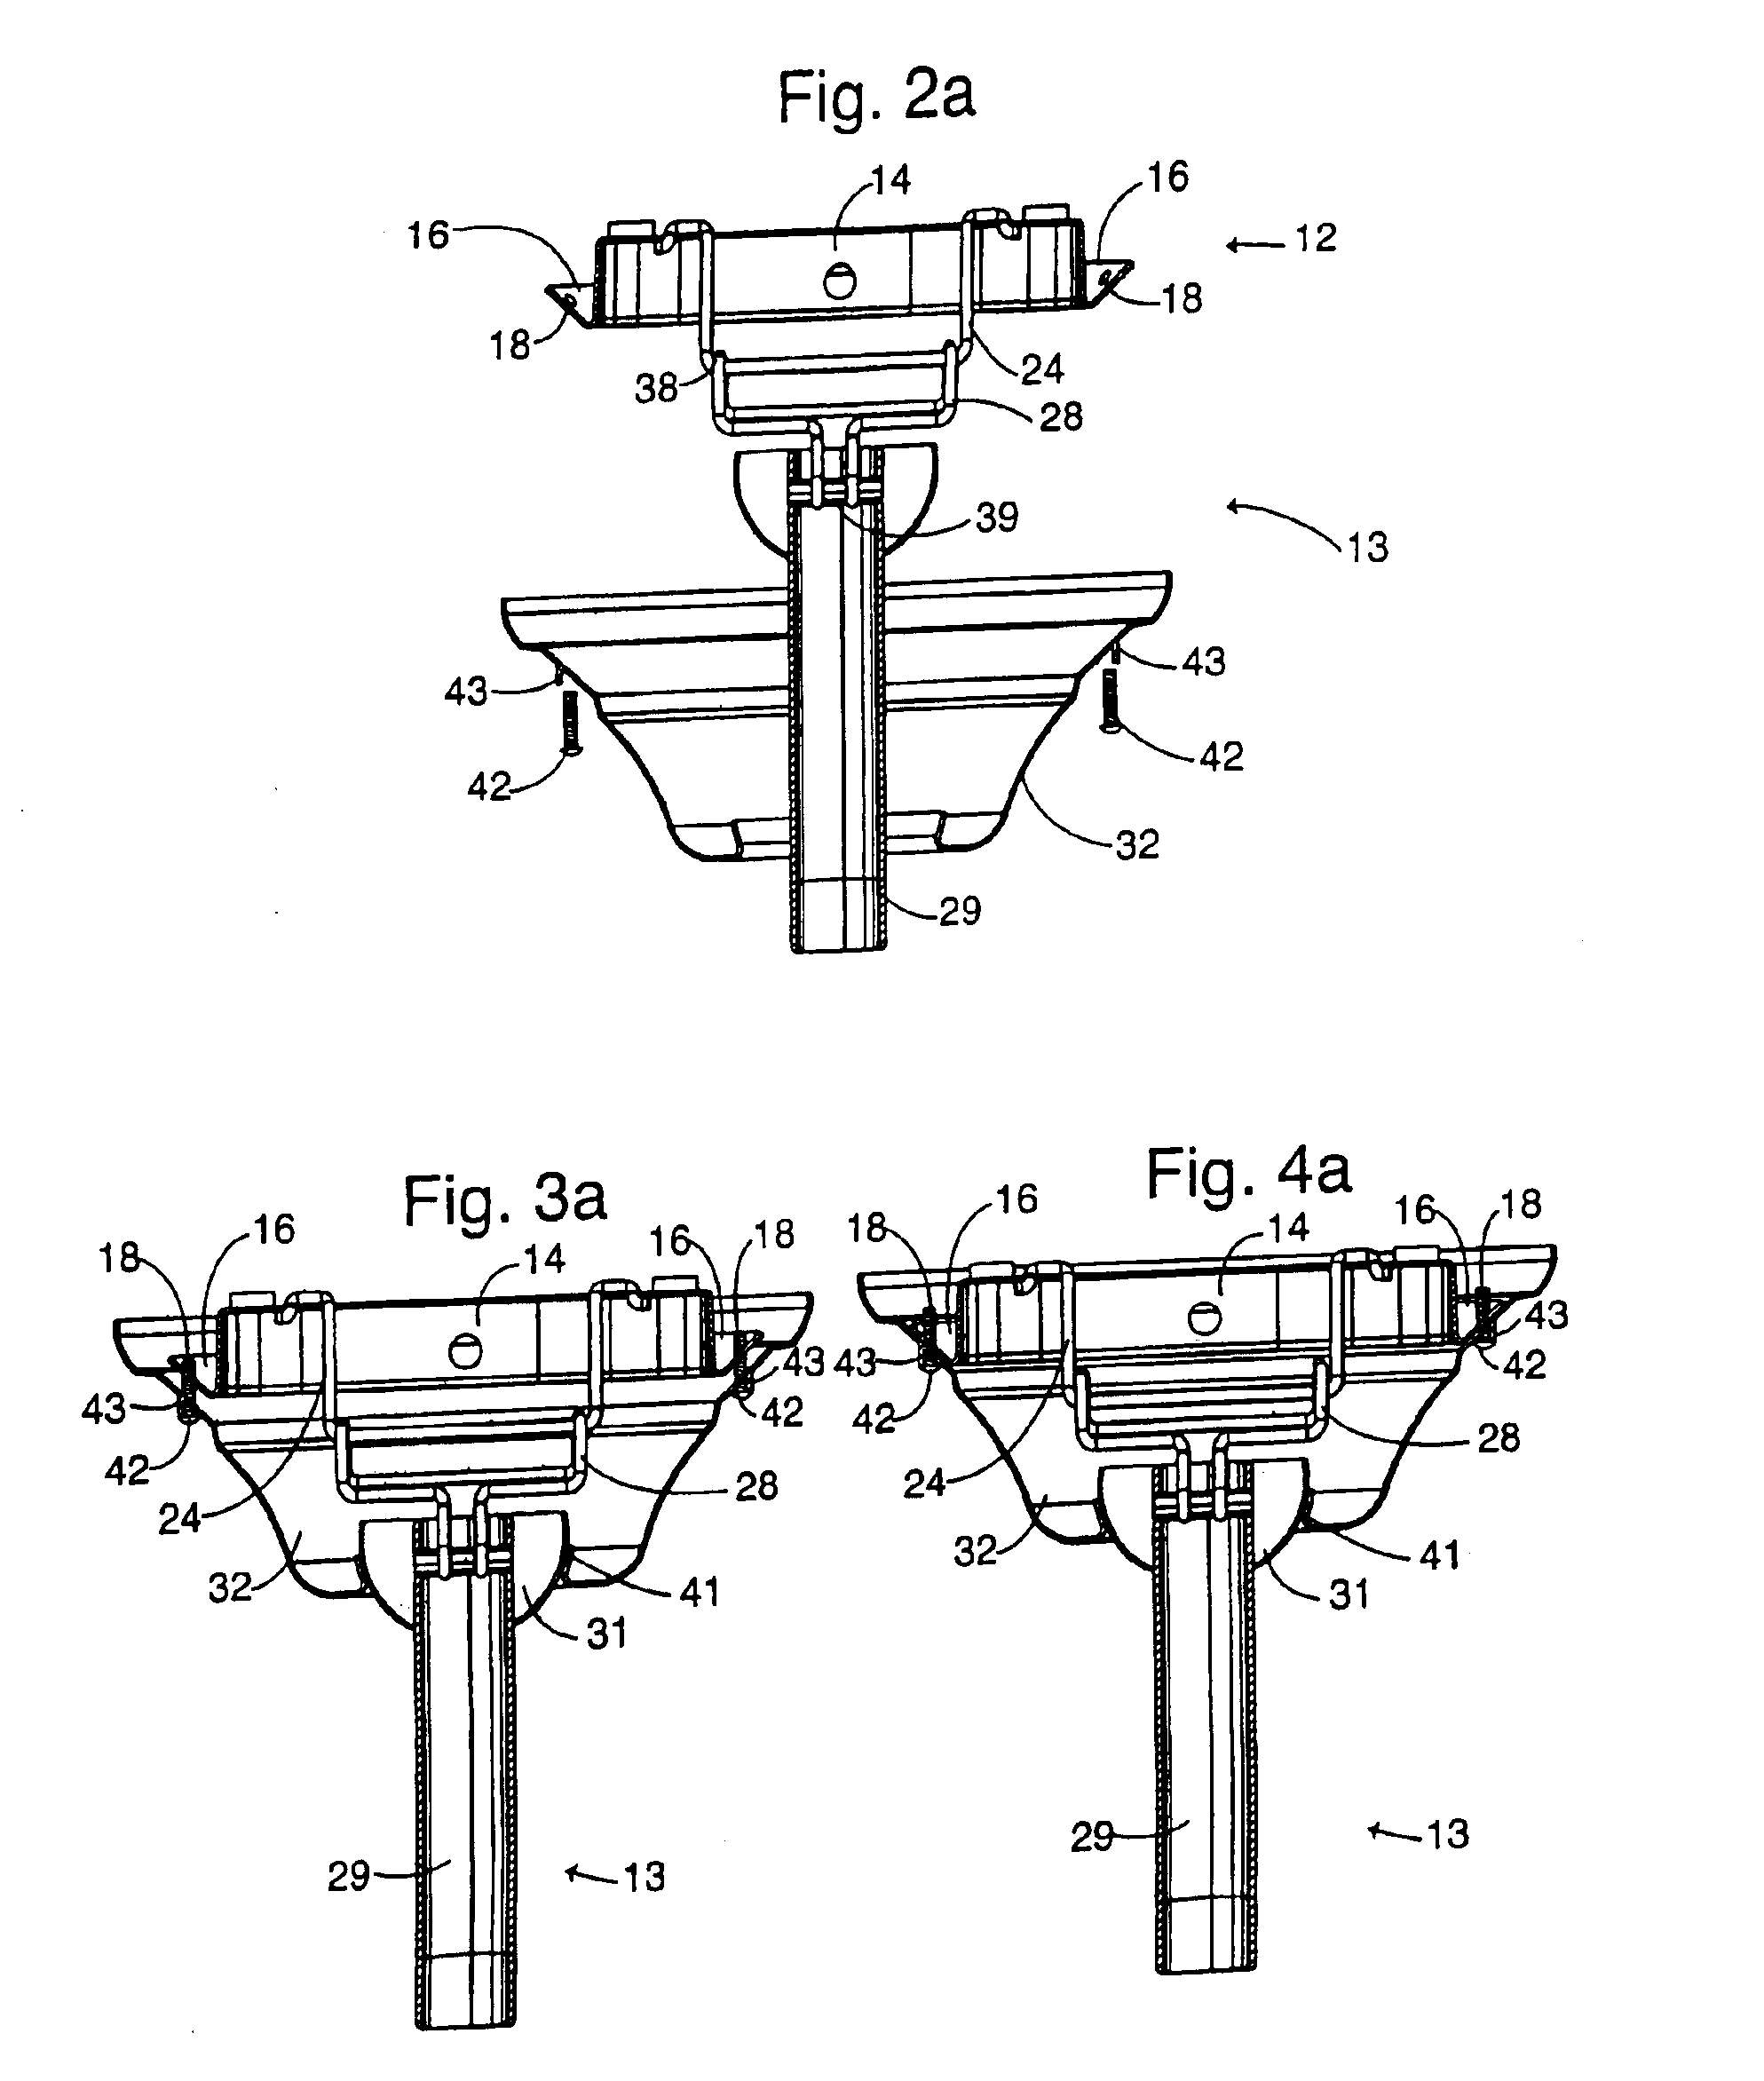 Mounting system for supporting a ceiling fan assembly